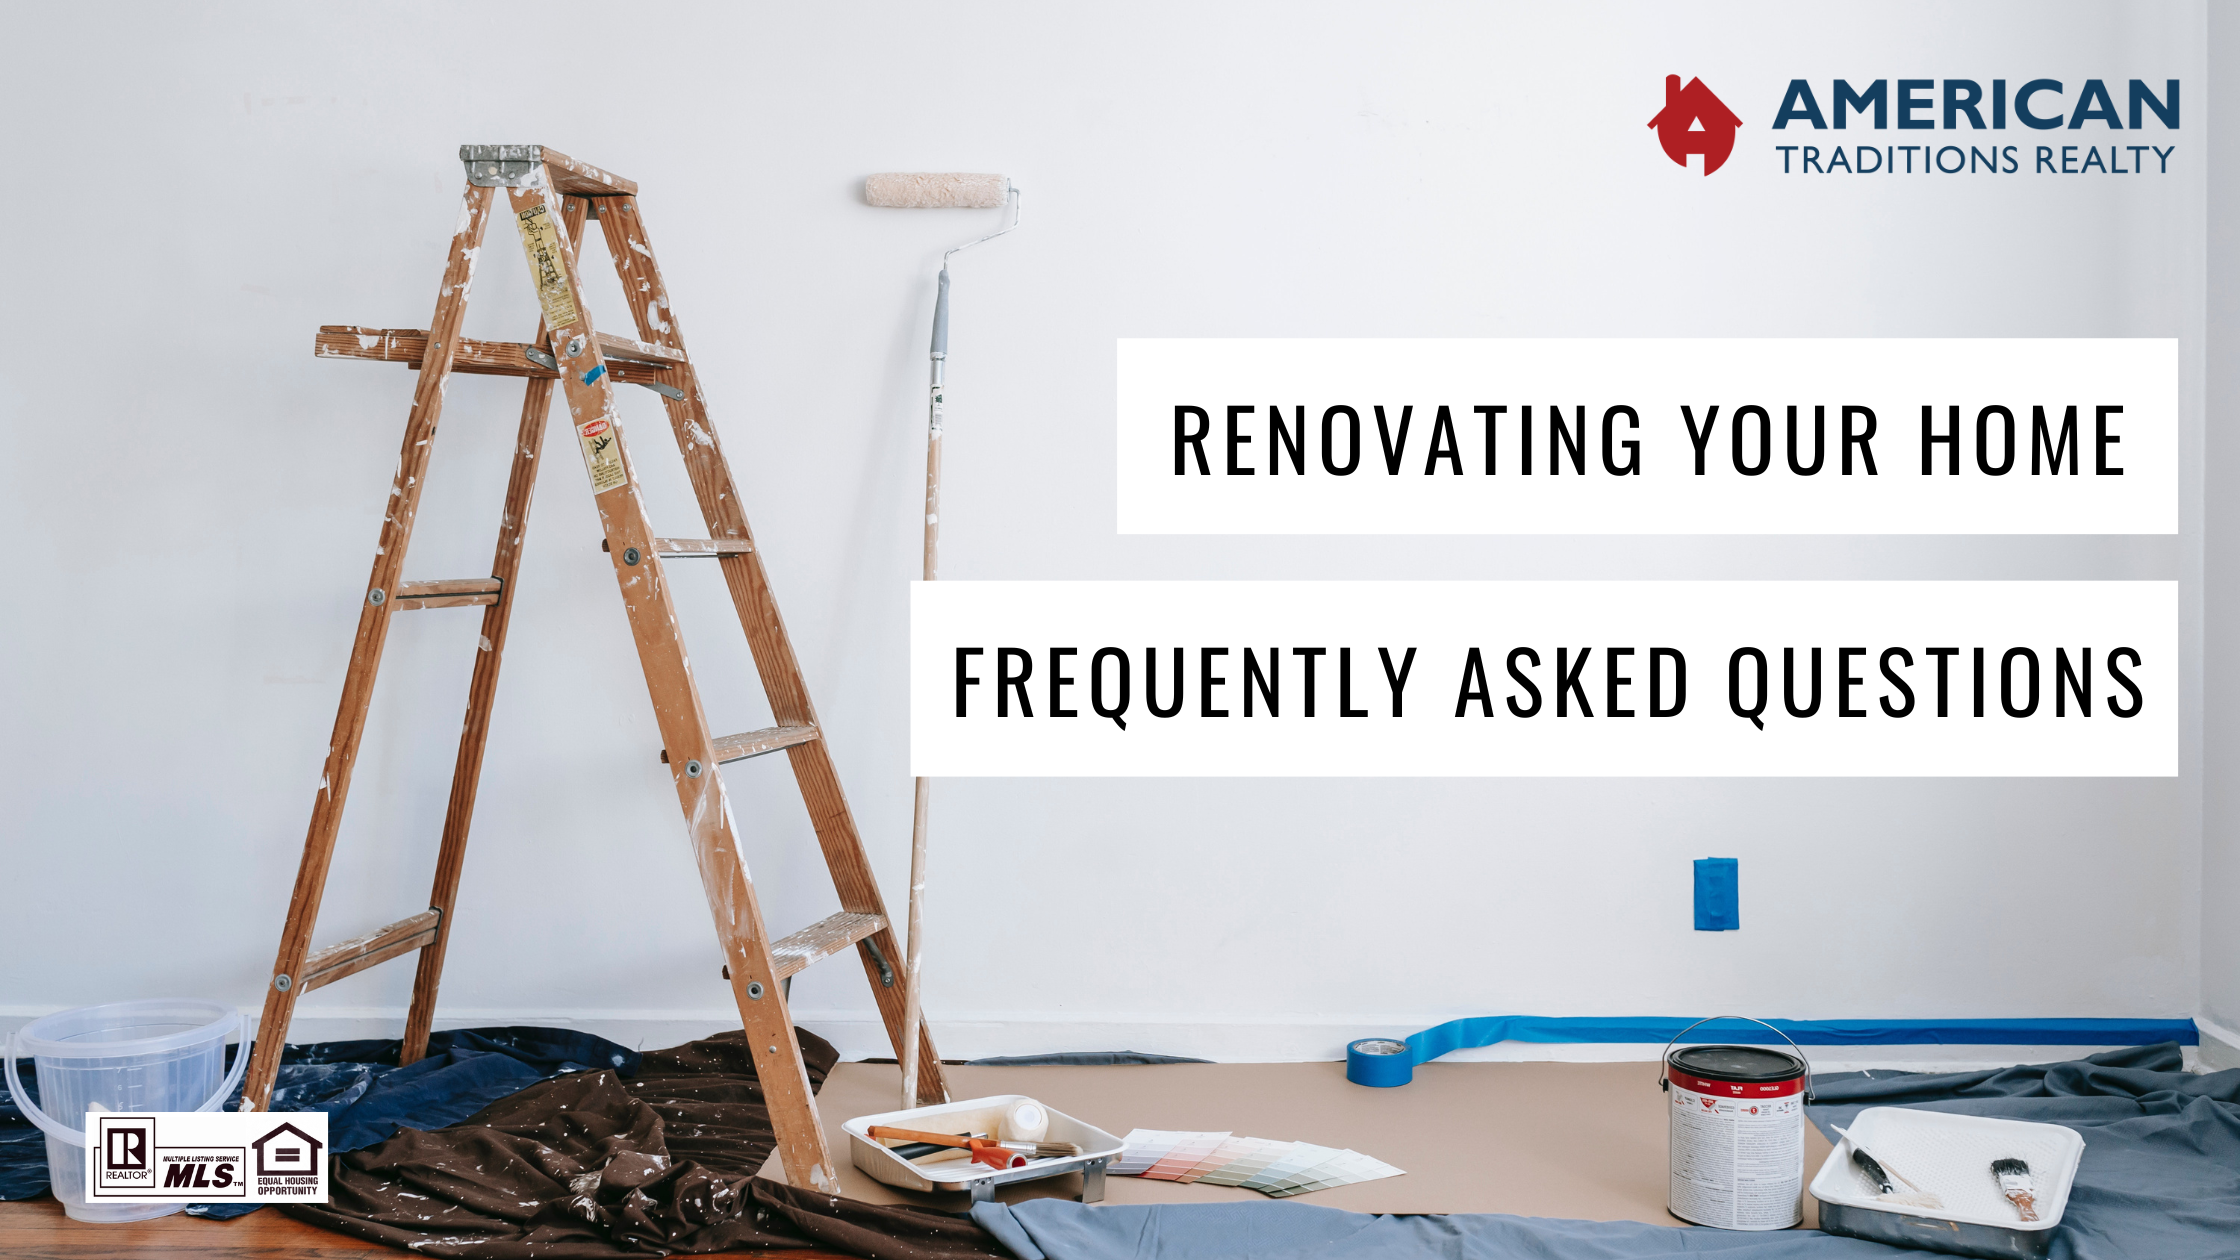 Renovating Your Home? Check Our FAQ’s!